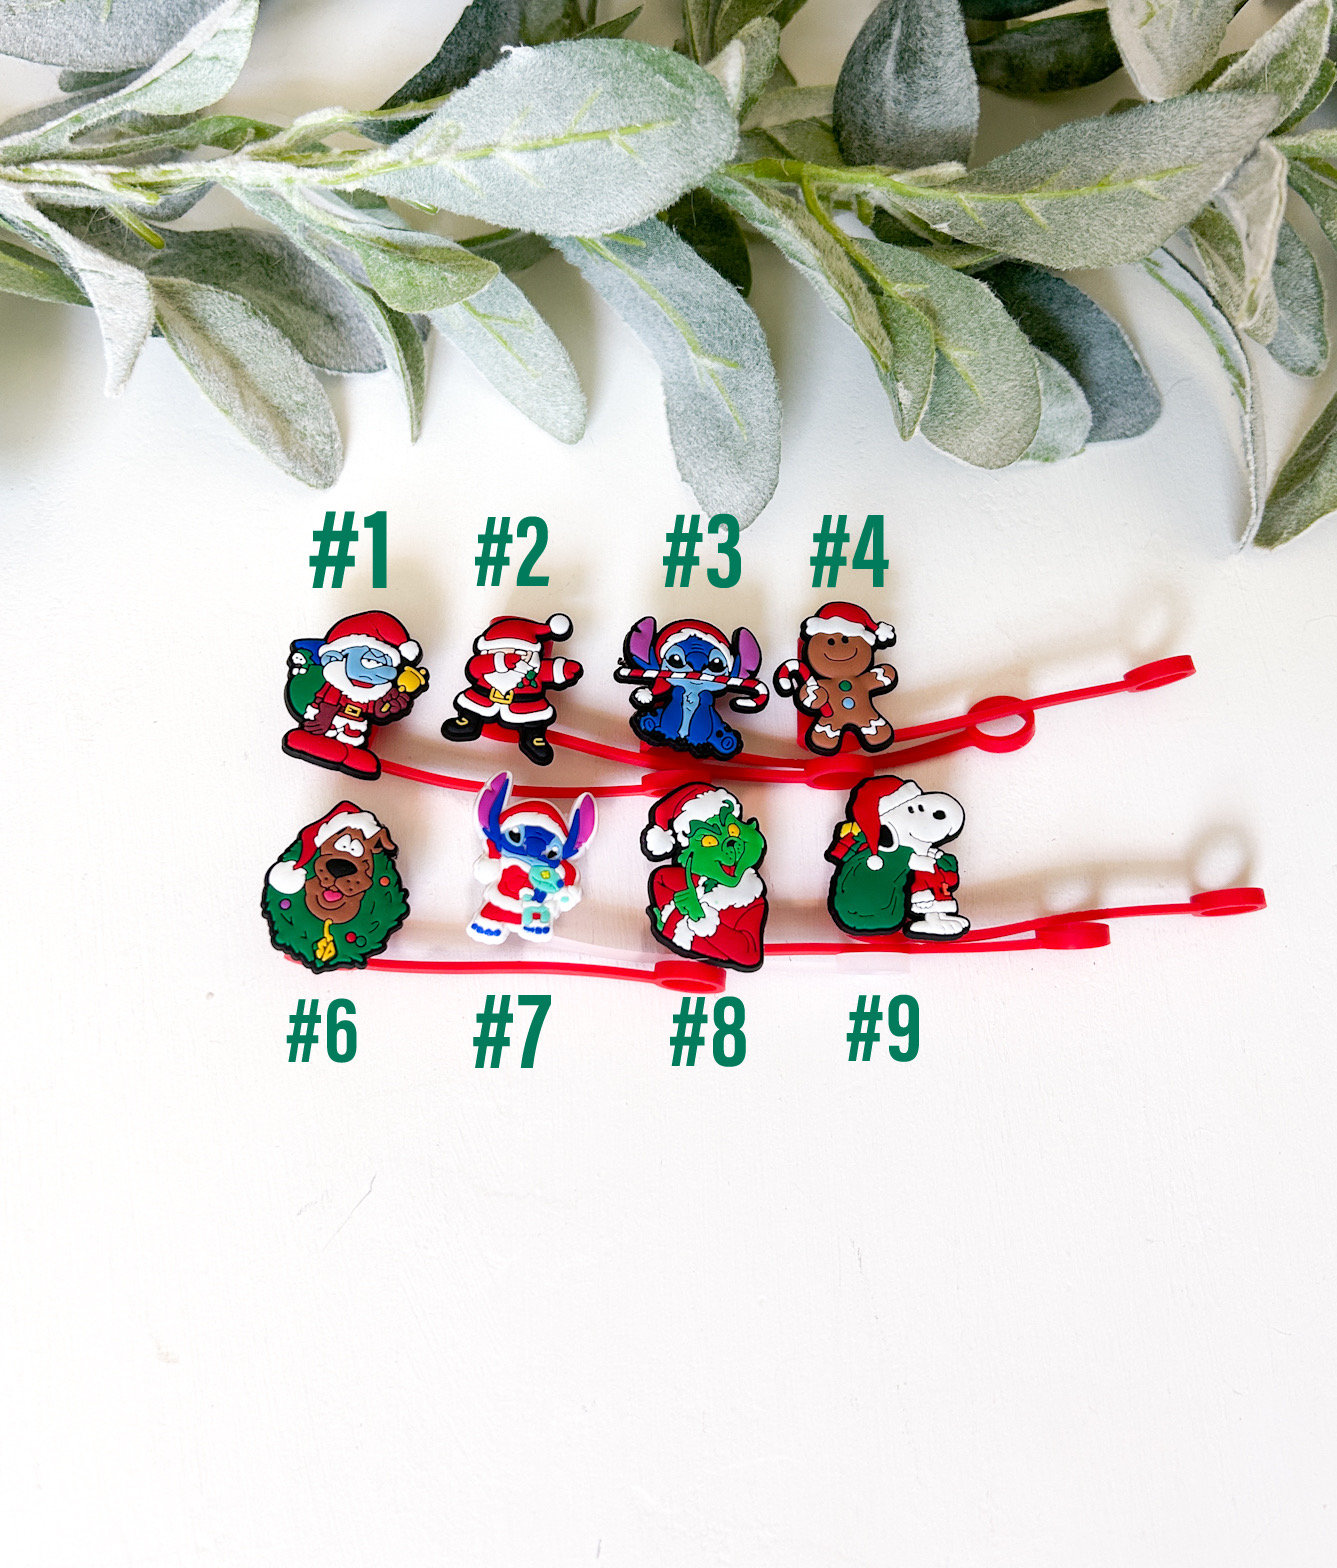 5pcs Random Christmas Silicone Straw Toppers For 6-8mm Straws, Santa Claus  & Christmas Tree Design, Portable Straw Cap For Protection And Decoration